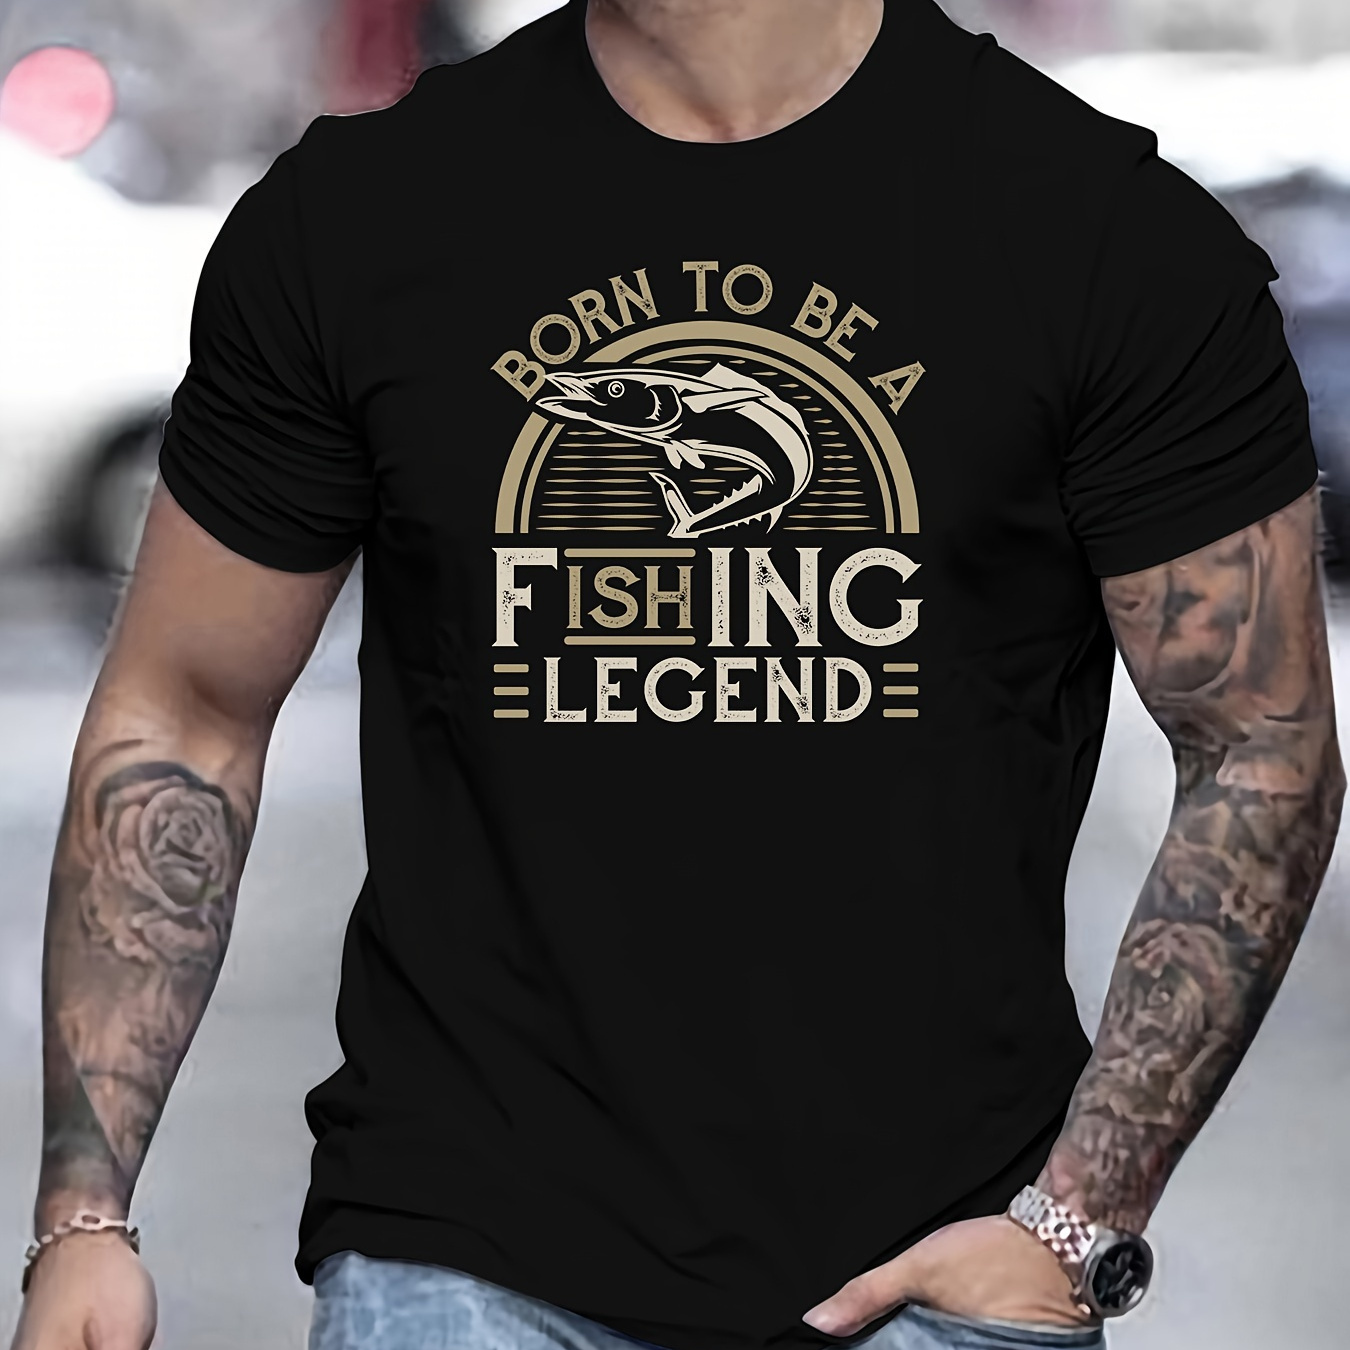 

Men's Born To Be Fishing Legend Letter Print Short Sleeve T-shirts, Comfy Casual Elastic Crew Neck Tops For Men's Outdoor Activities